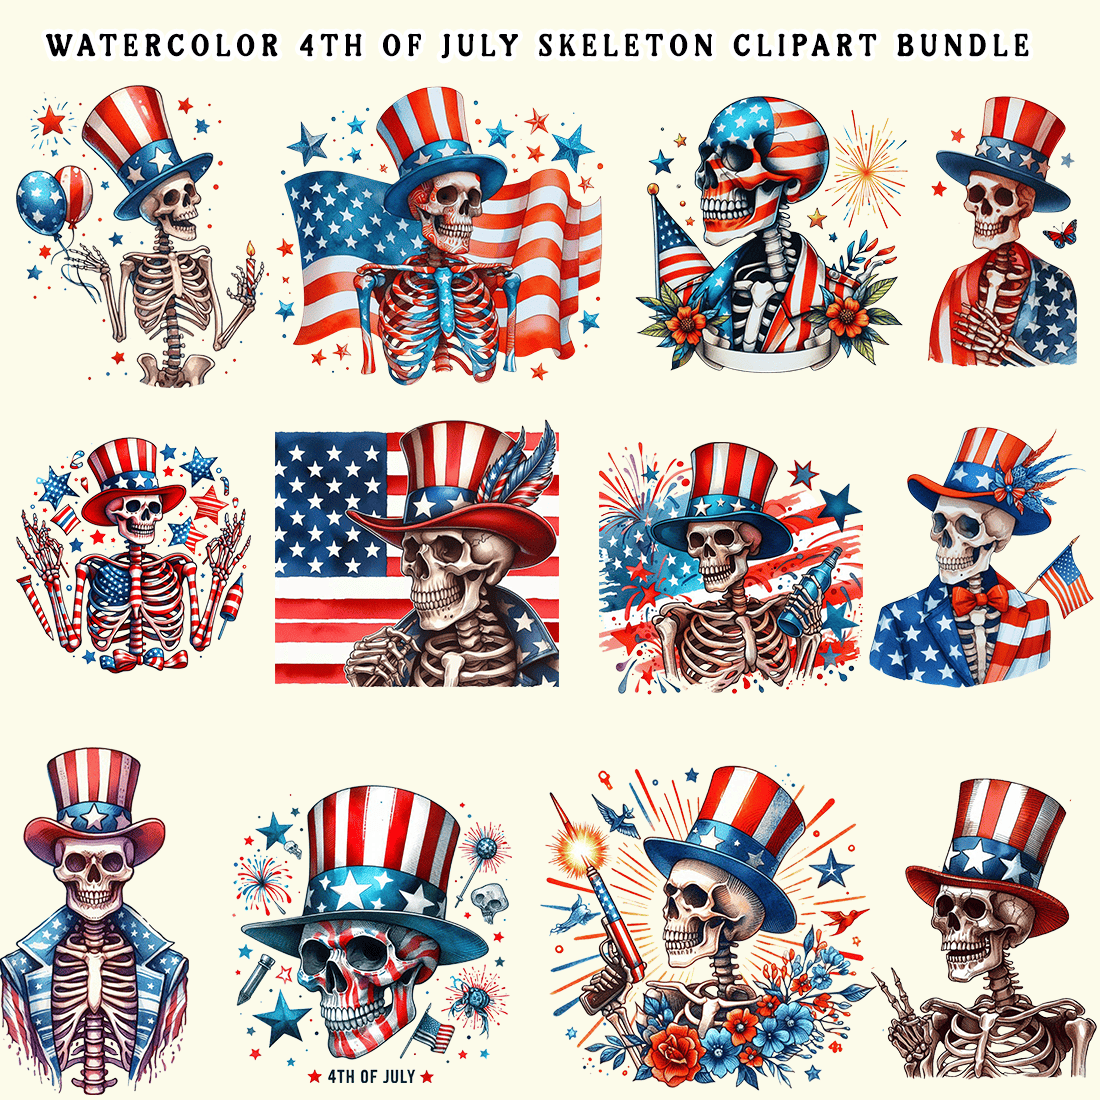 Watercolor 4th Of July Skeleton Clipart Bundle preview image.